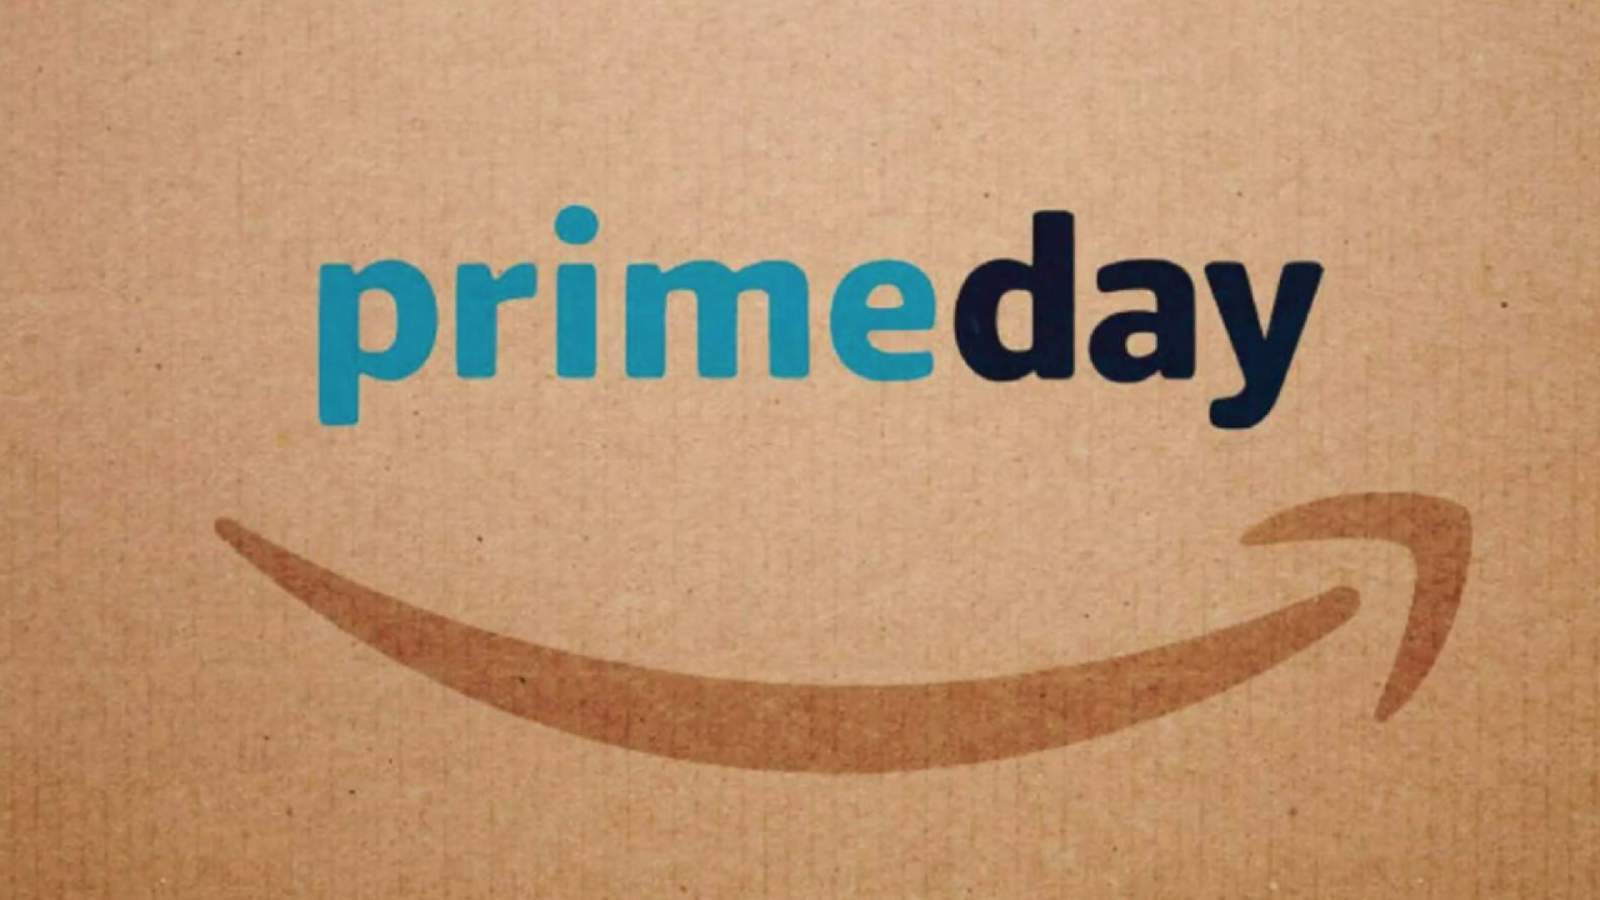 Shopping during Amazon Prime Day? Be aware of this scam.